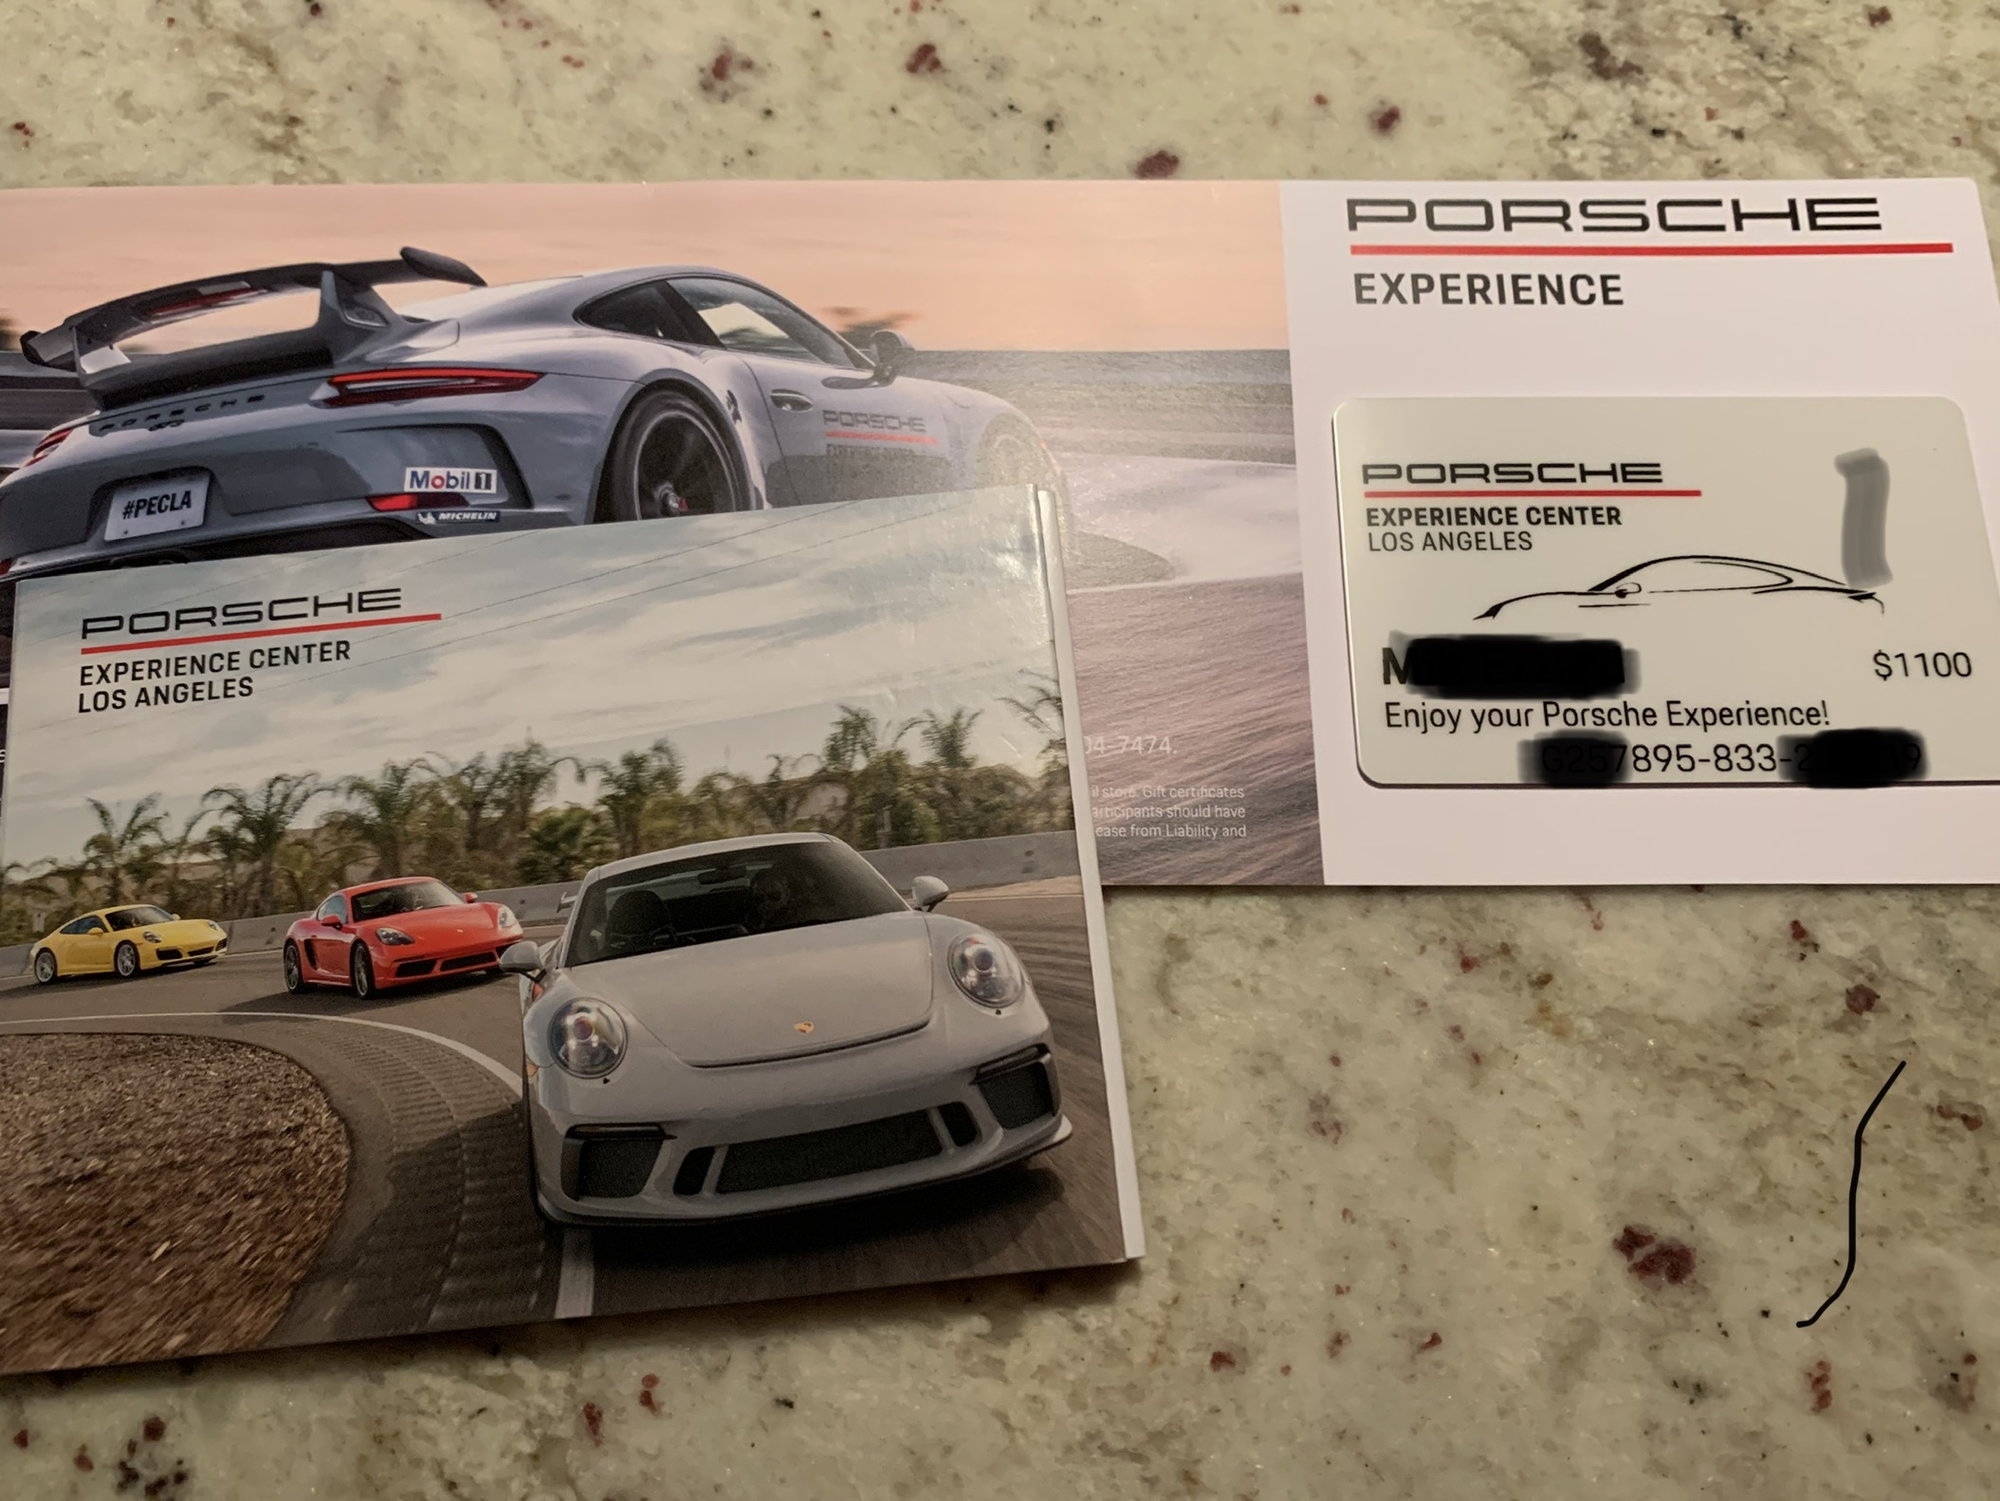 Driving Gift Vouchers - Supercar Experience Ireland